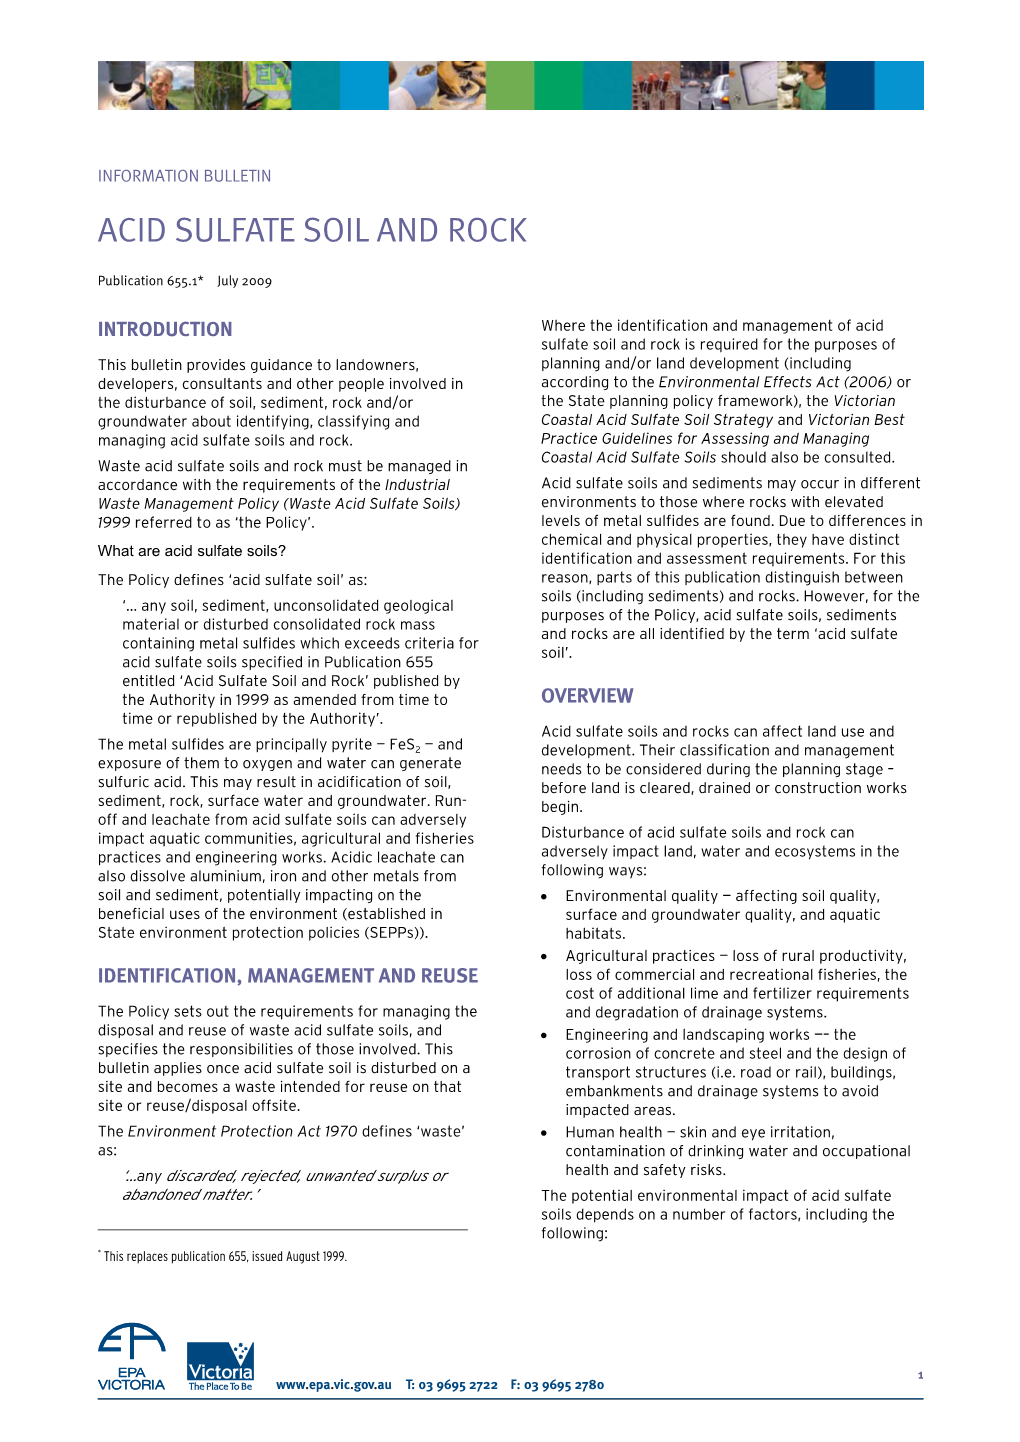 Acid Sulfate Soil and Rock